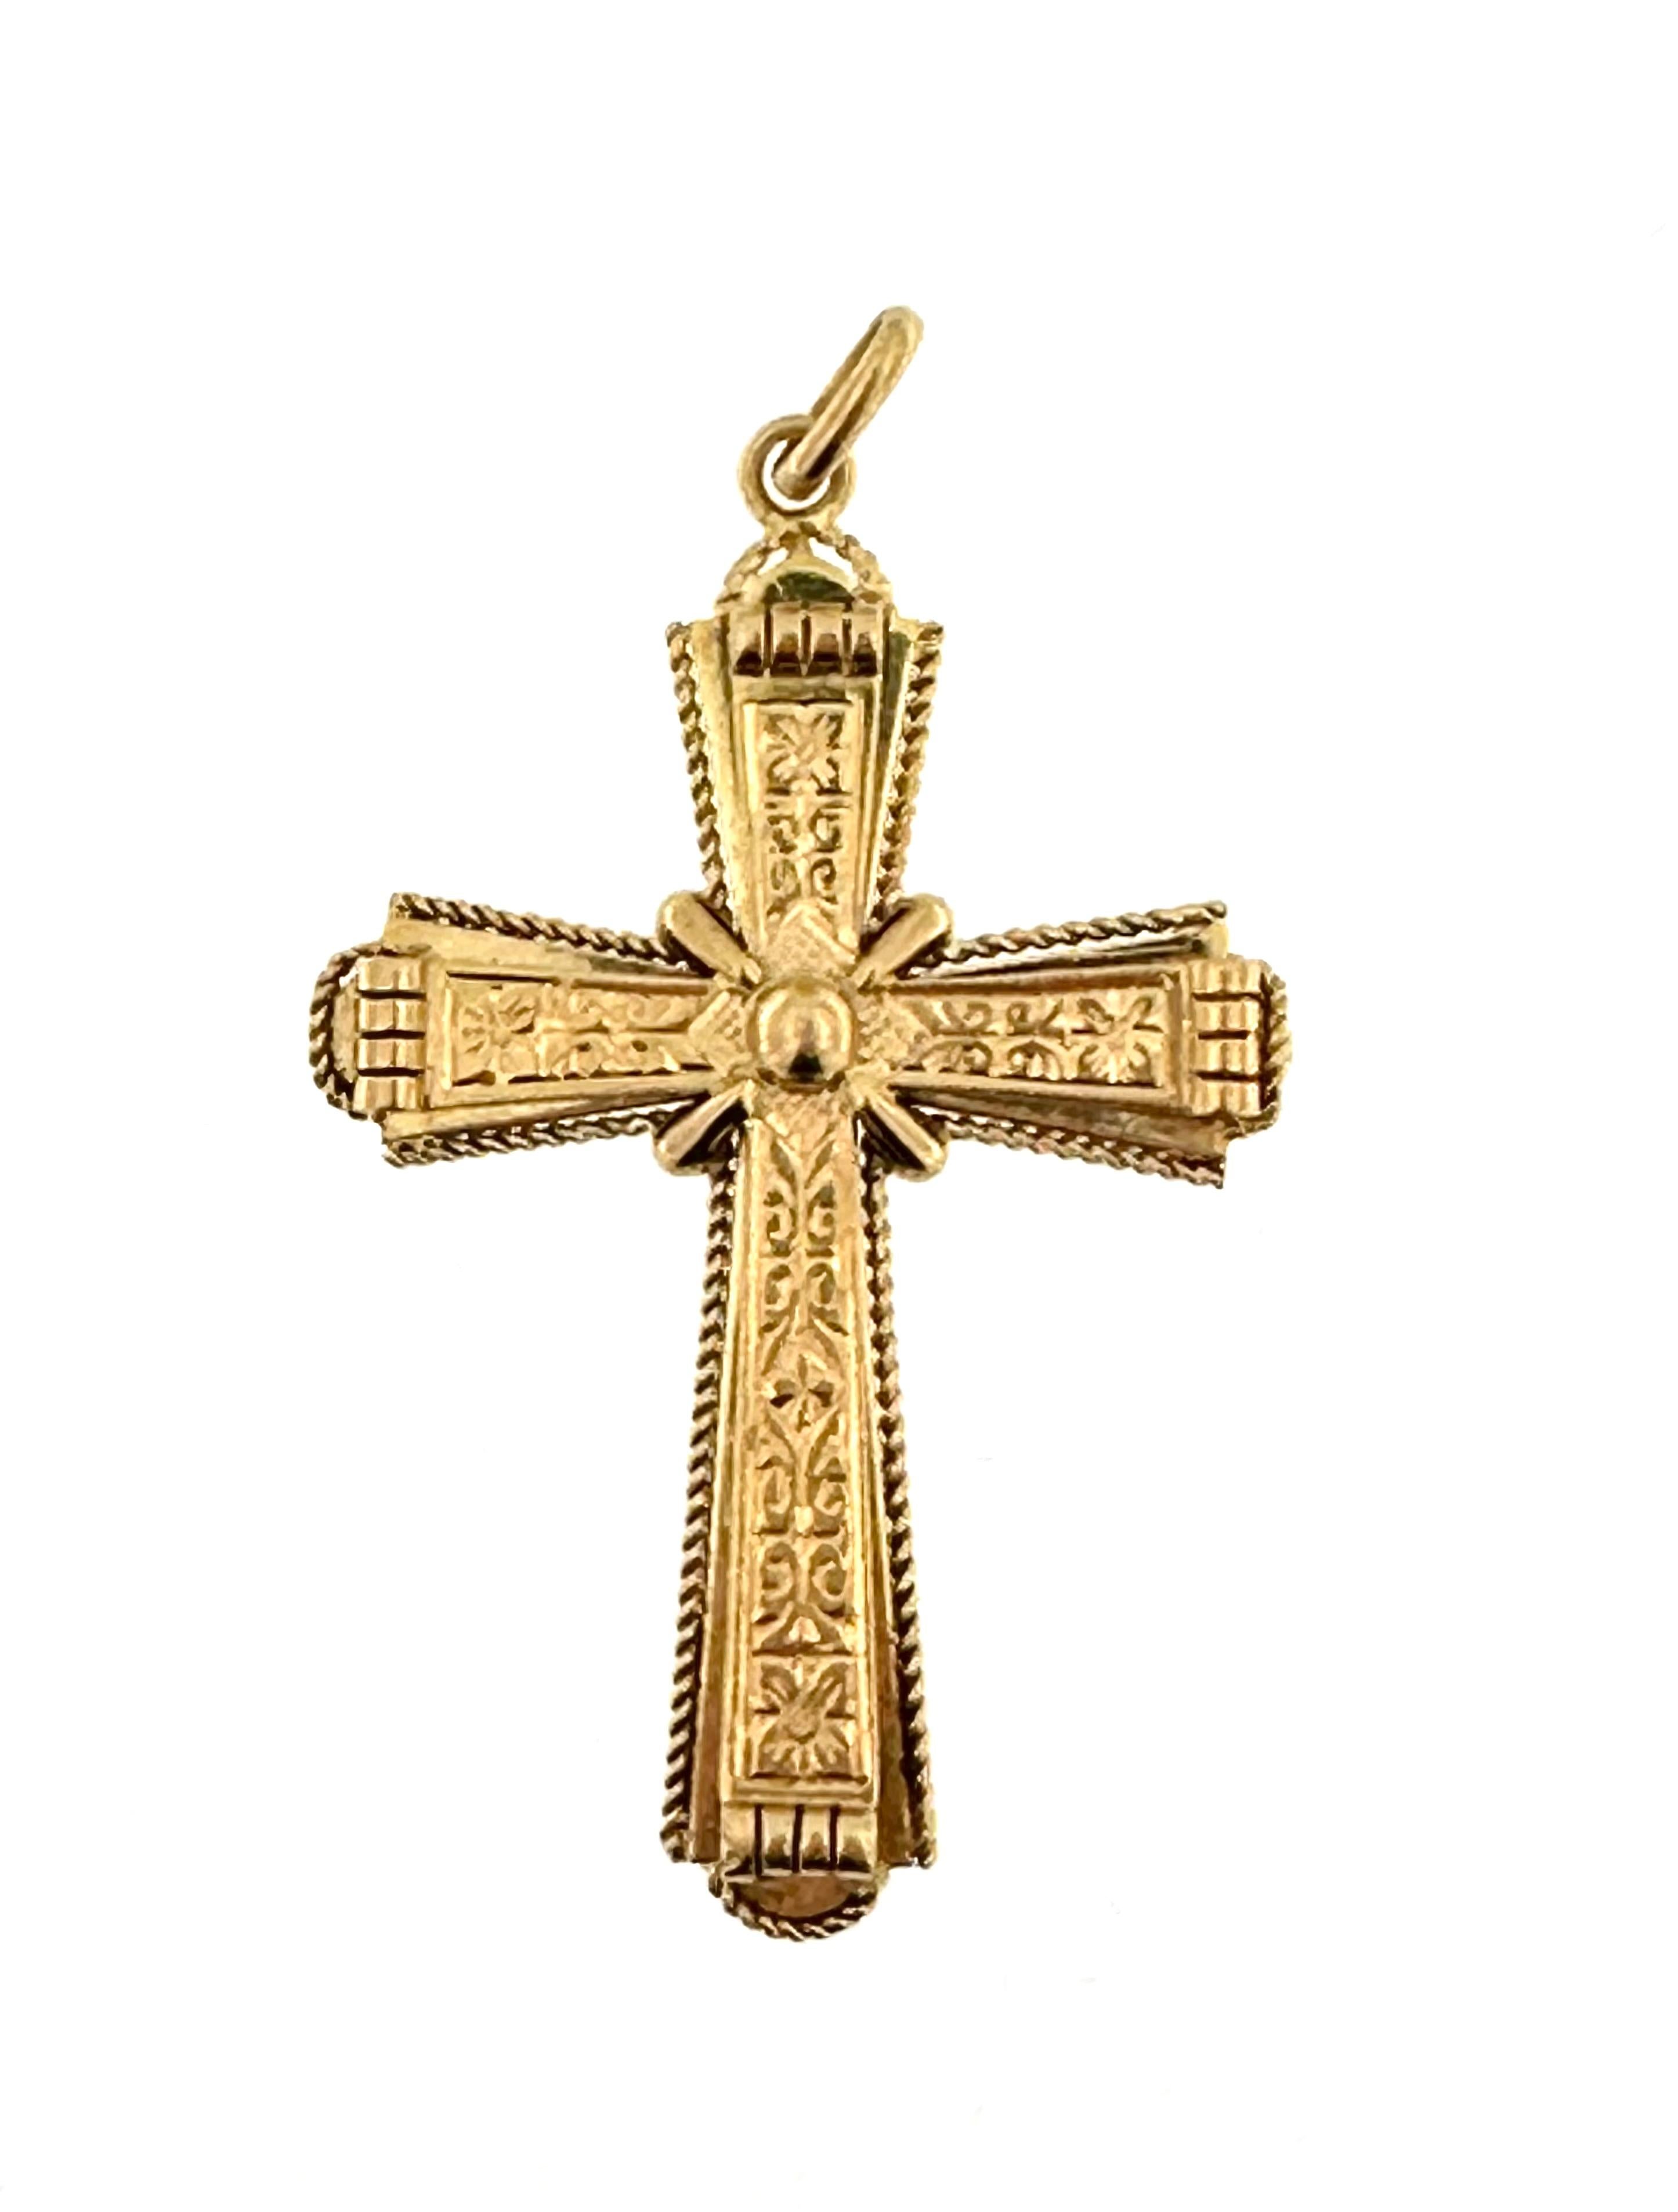 This antique italian cross impresses by the precision and the detail of the decoration. Beautiful and elegant this vintage Italian cross is hand-crafted with floral motifs. The 18kt yellow gold cross is in good used condition, with normal signs of